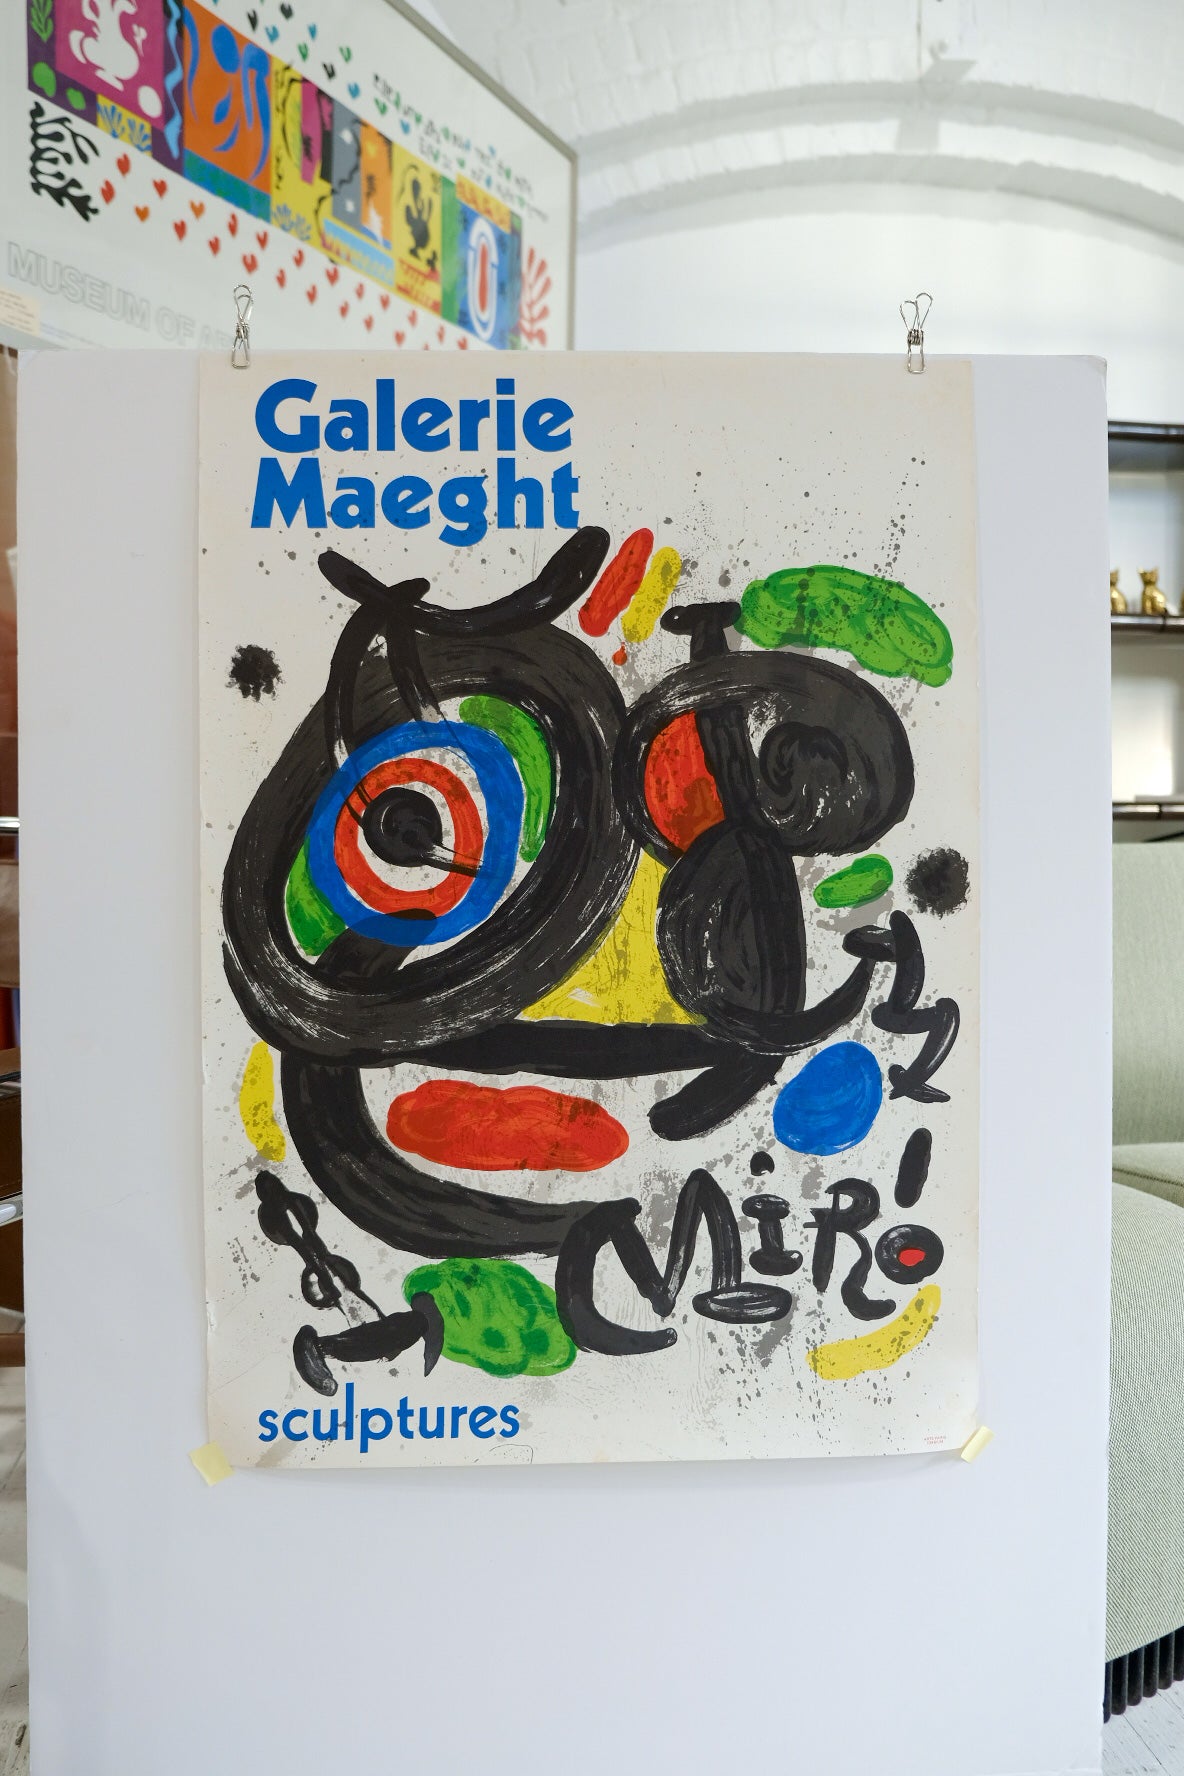 Joan Miro Sculpture Exhibition Print at Galerie Maeght